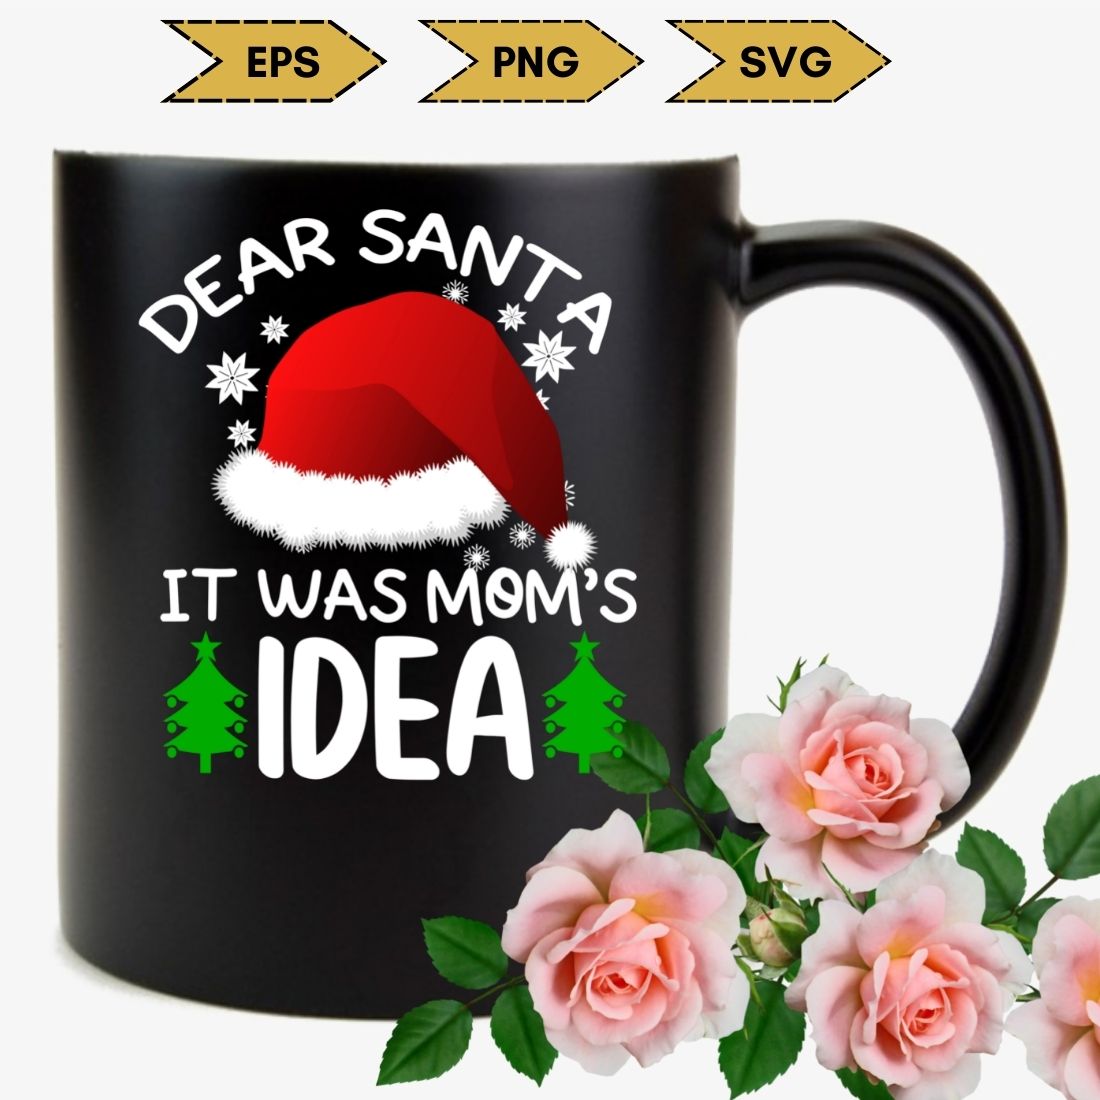 Image of black cup with amazing santa hat print.